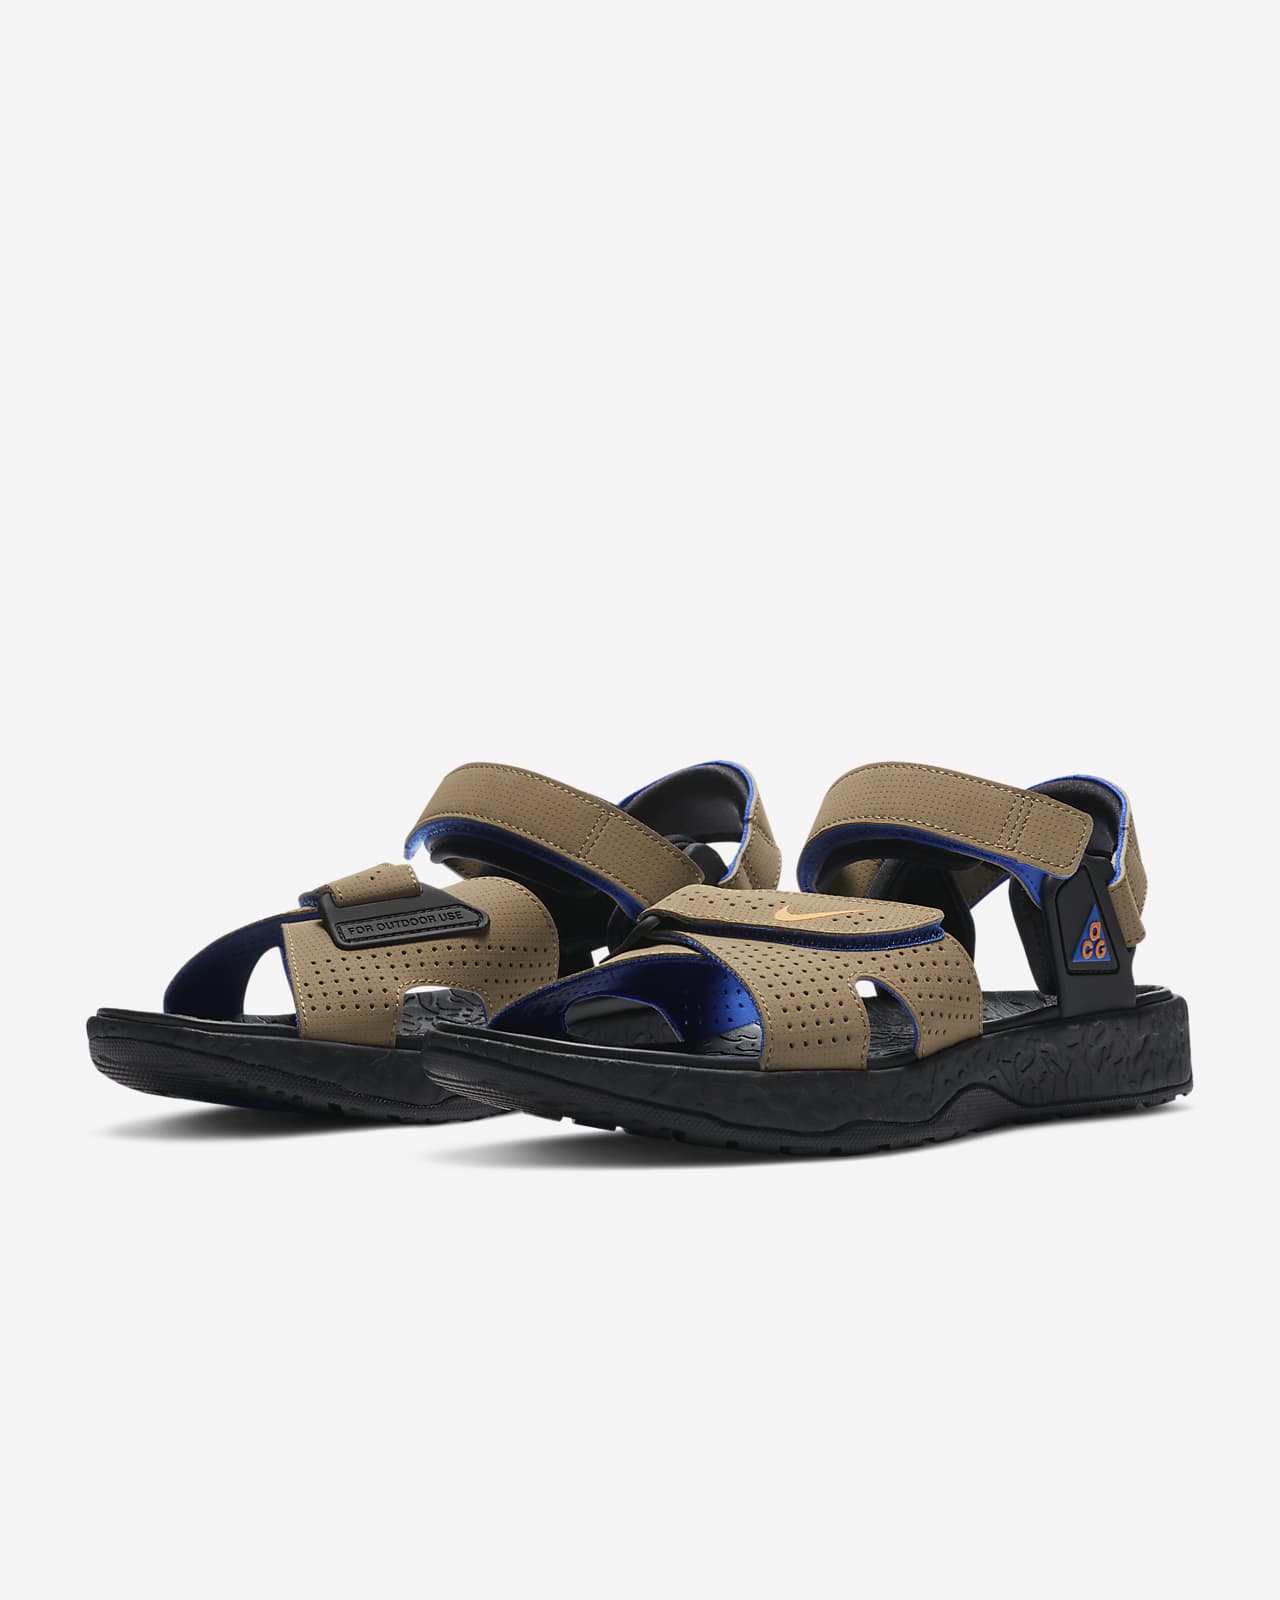 nike slides with ankle strap